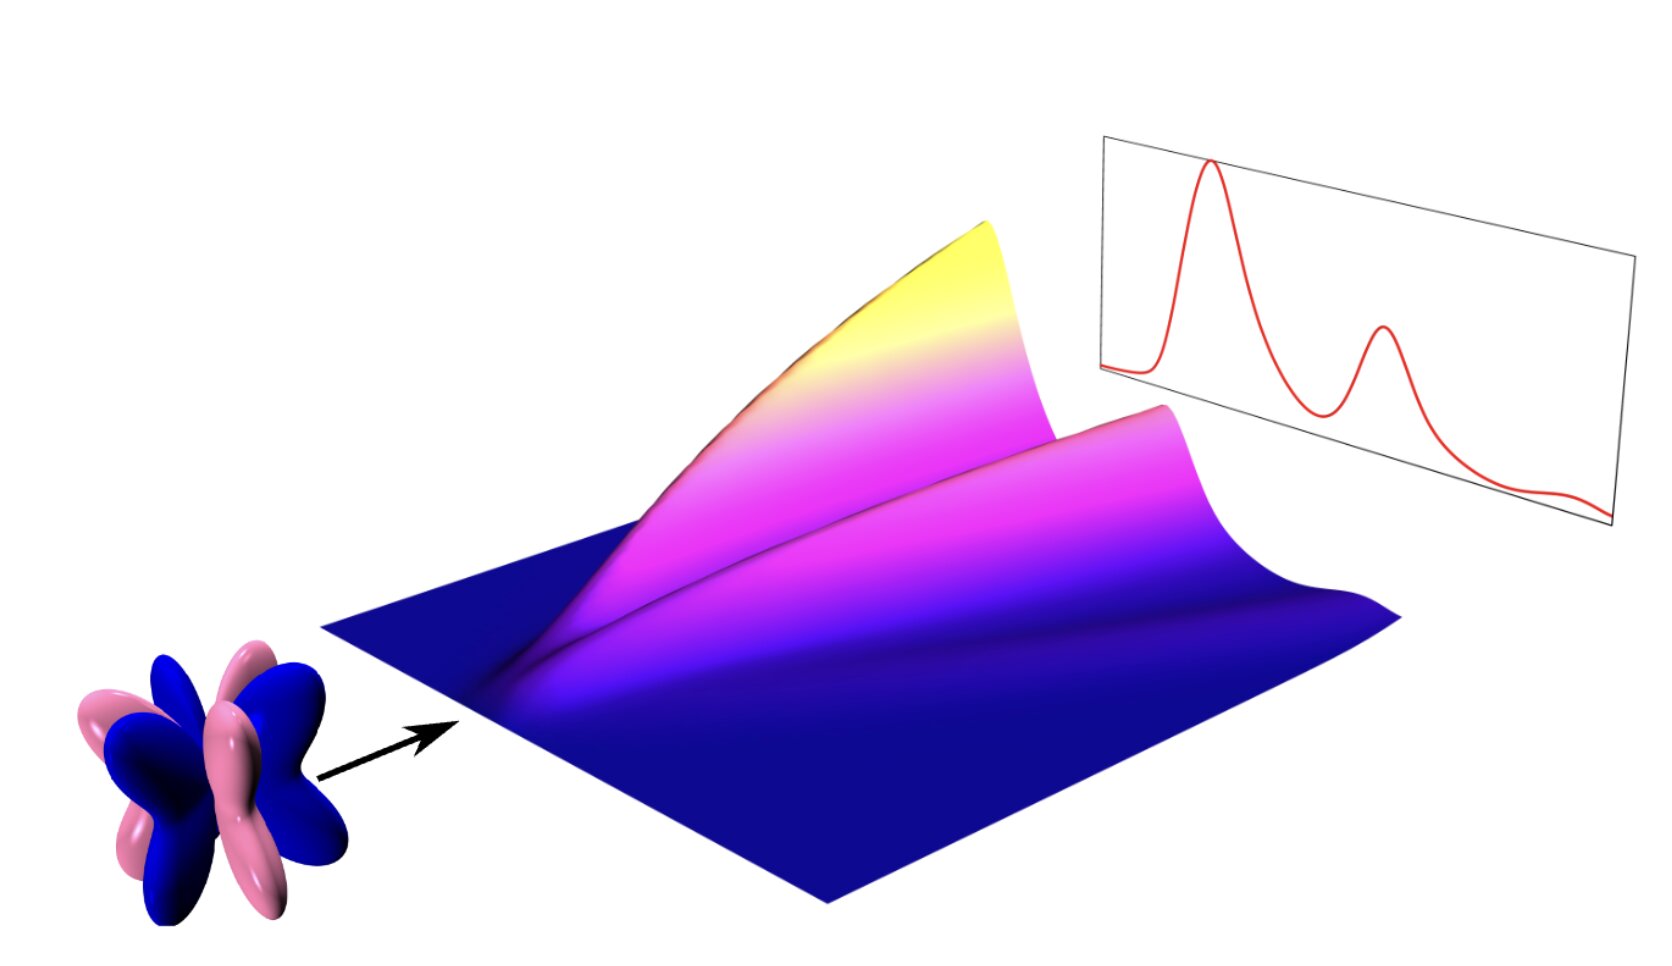 Study outlines spectroscopic signatures of fractionalization in octupolar quantum spin ice